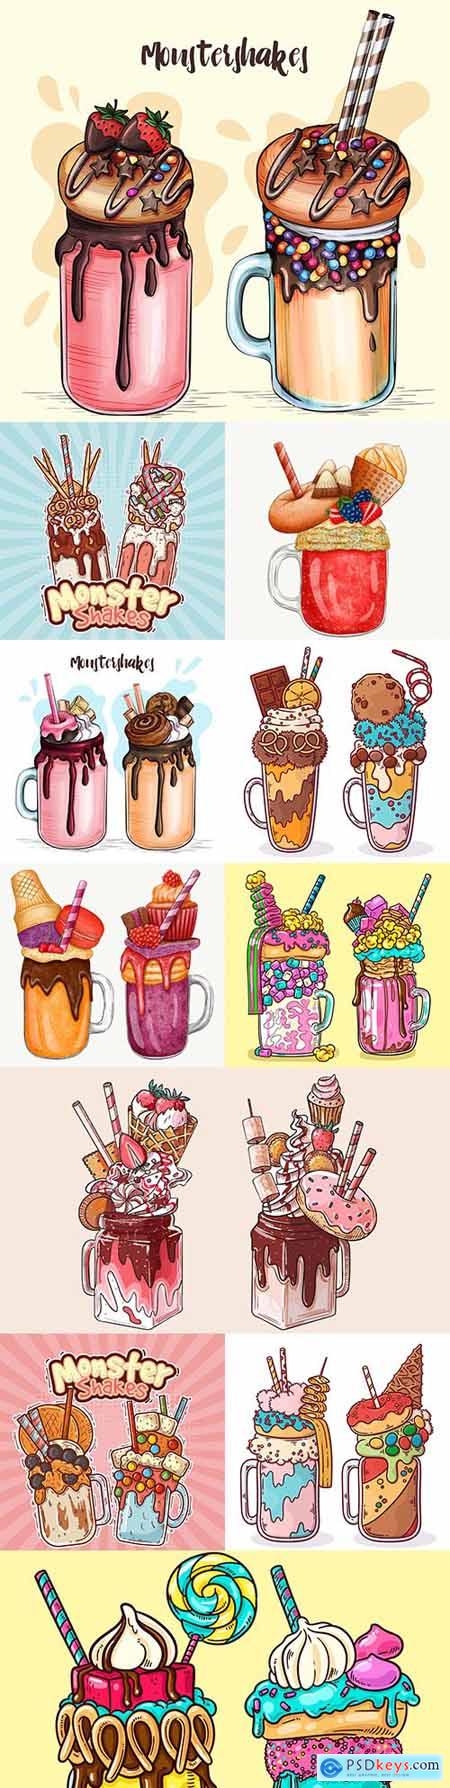 Tasty ice cream and monster shakes illustrations